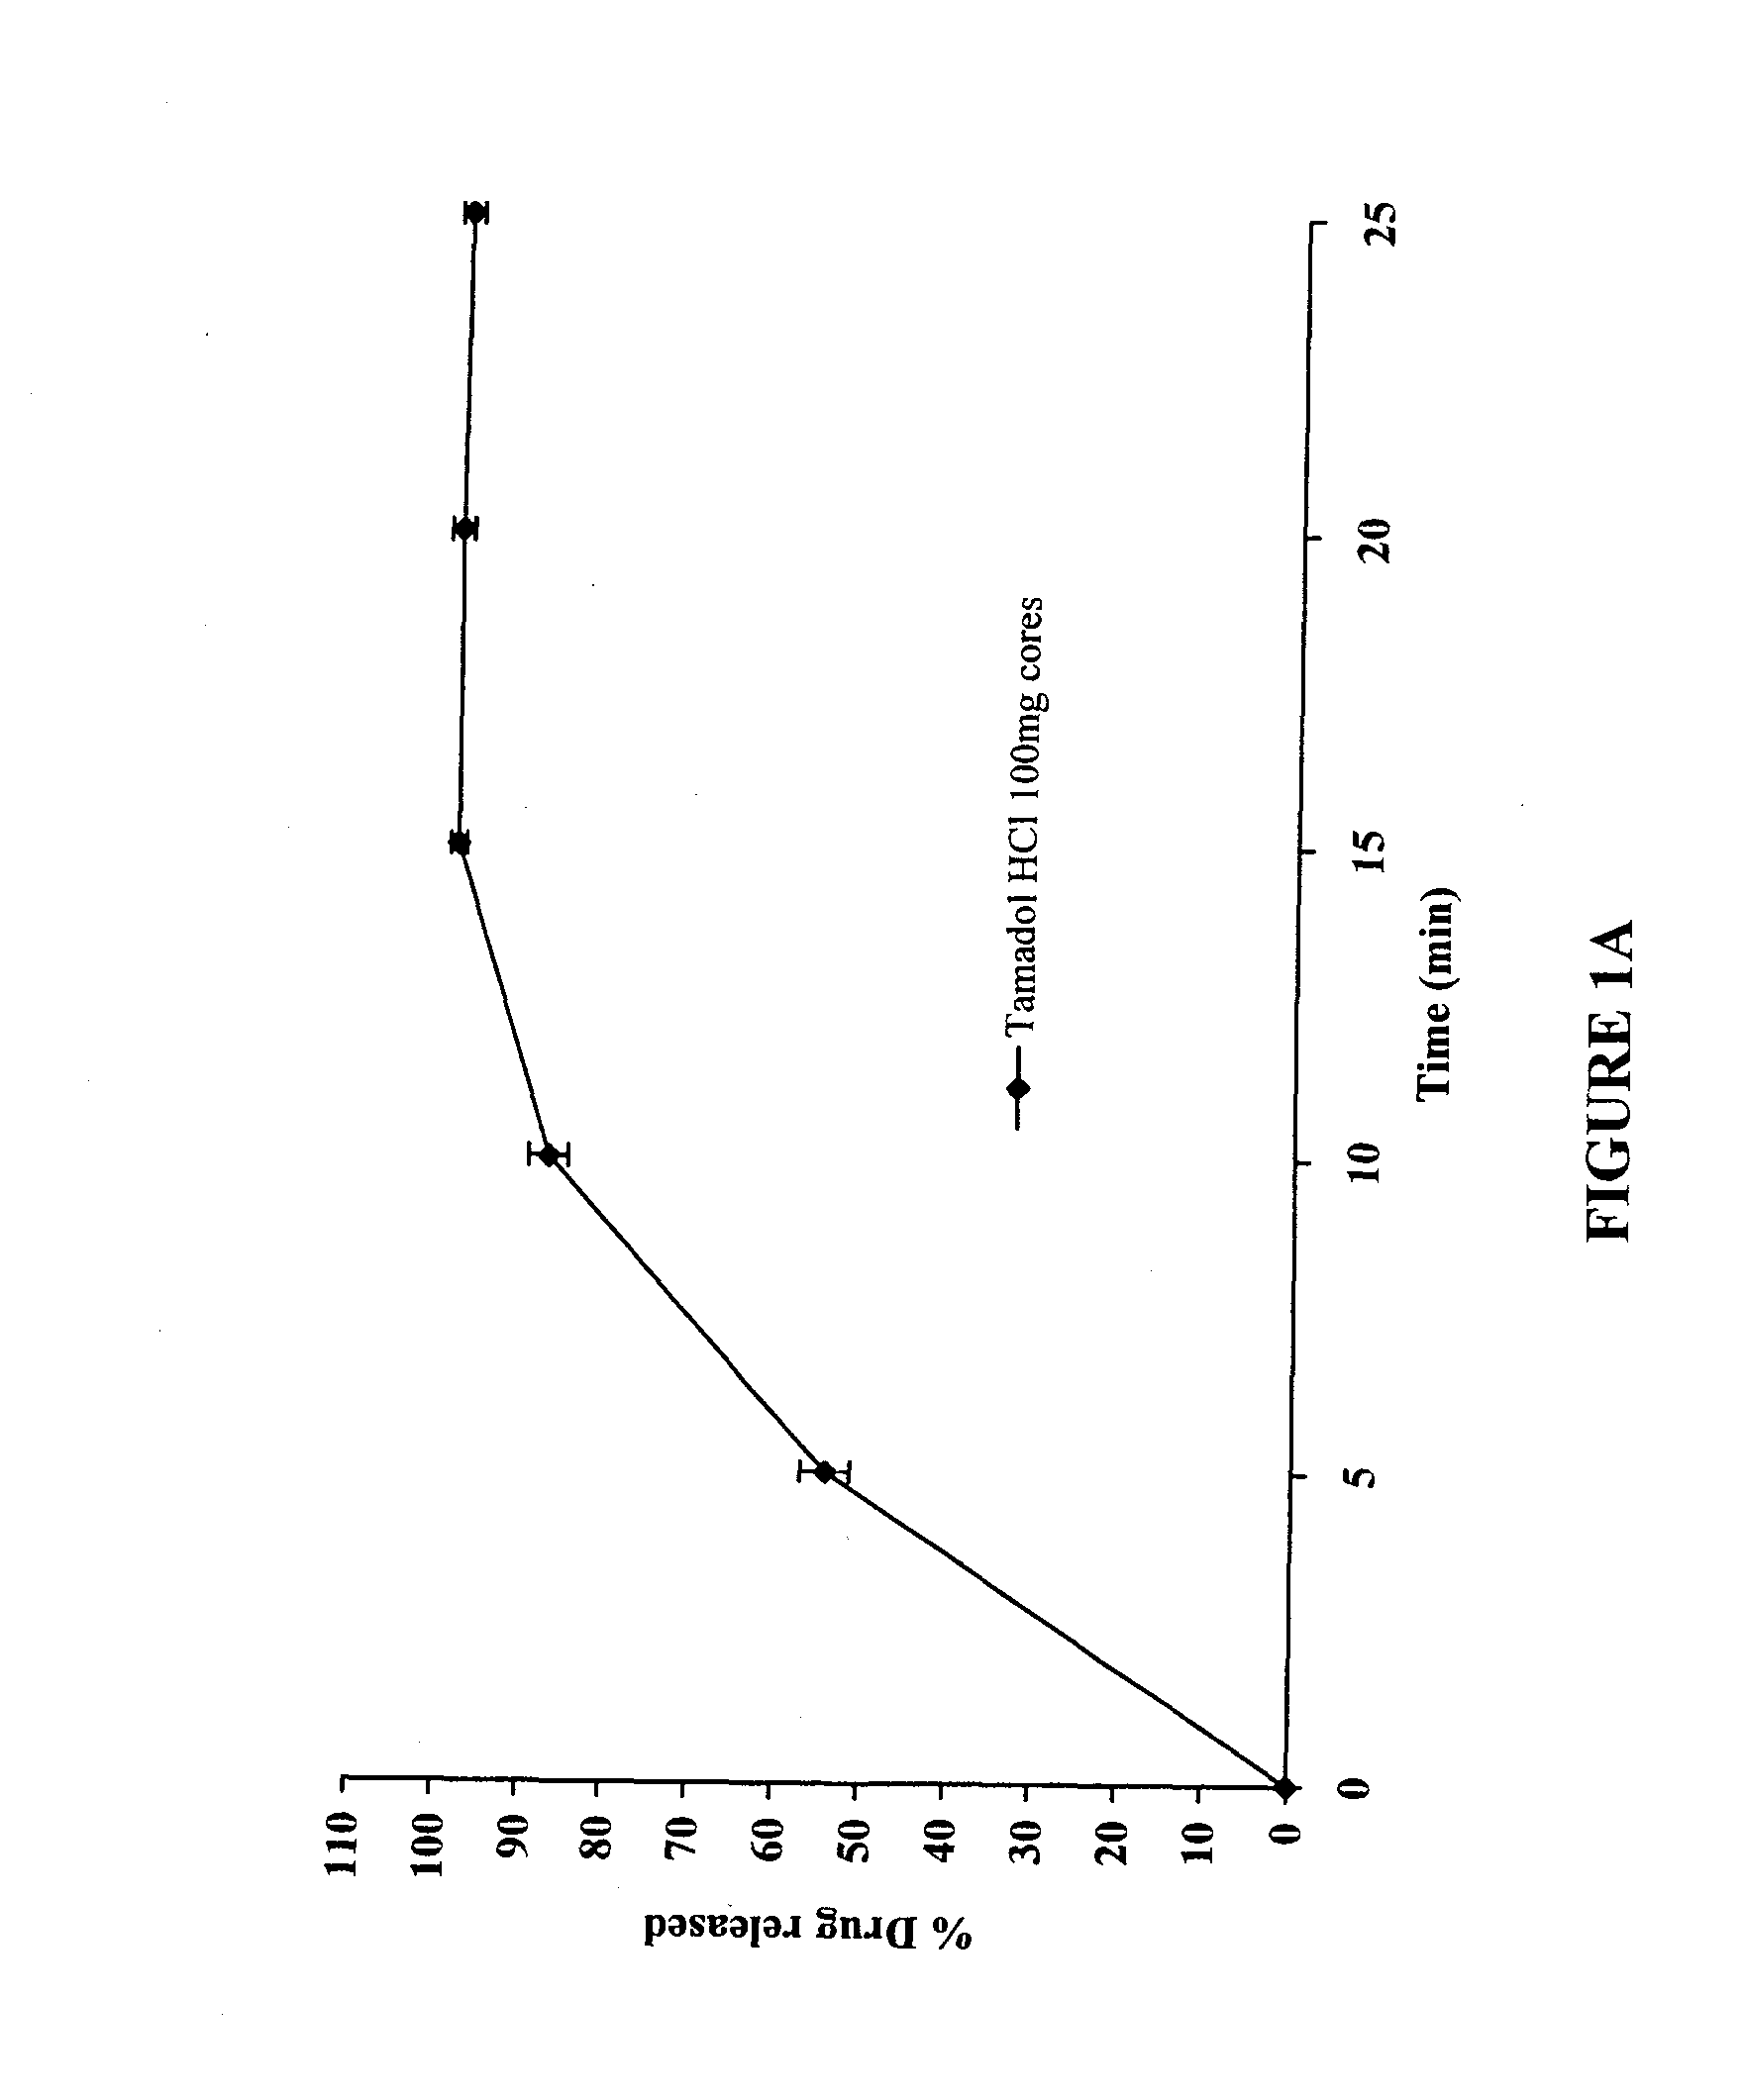 Modified release formulations of at least one form of tramadol